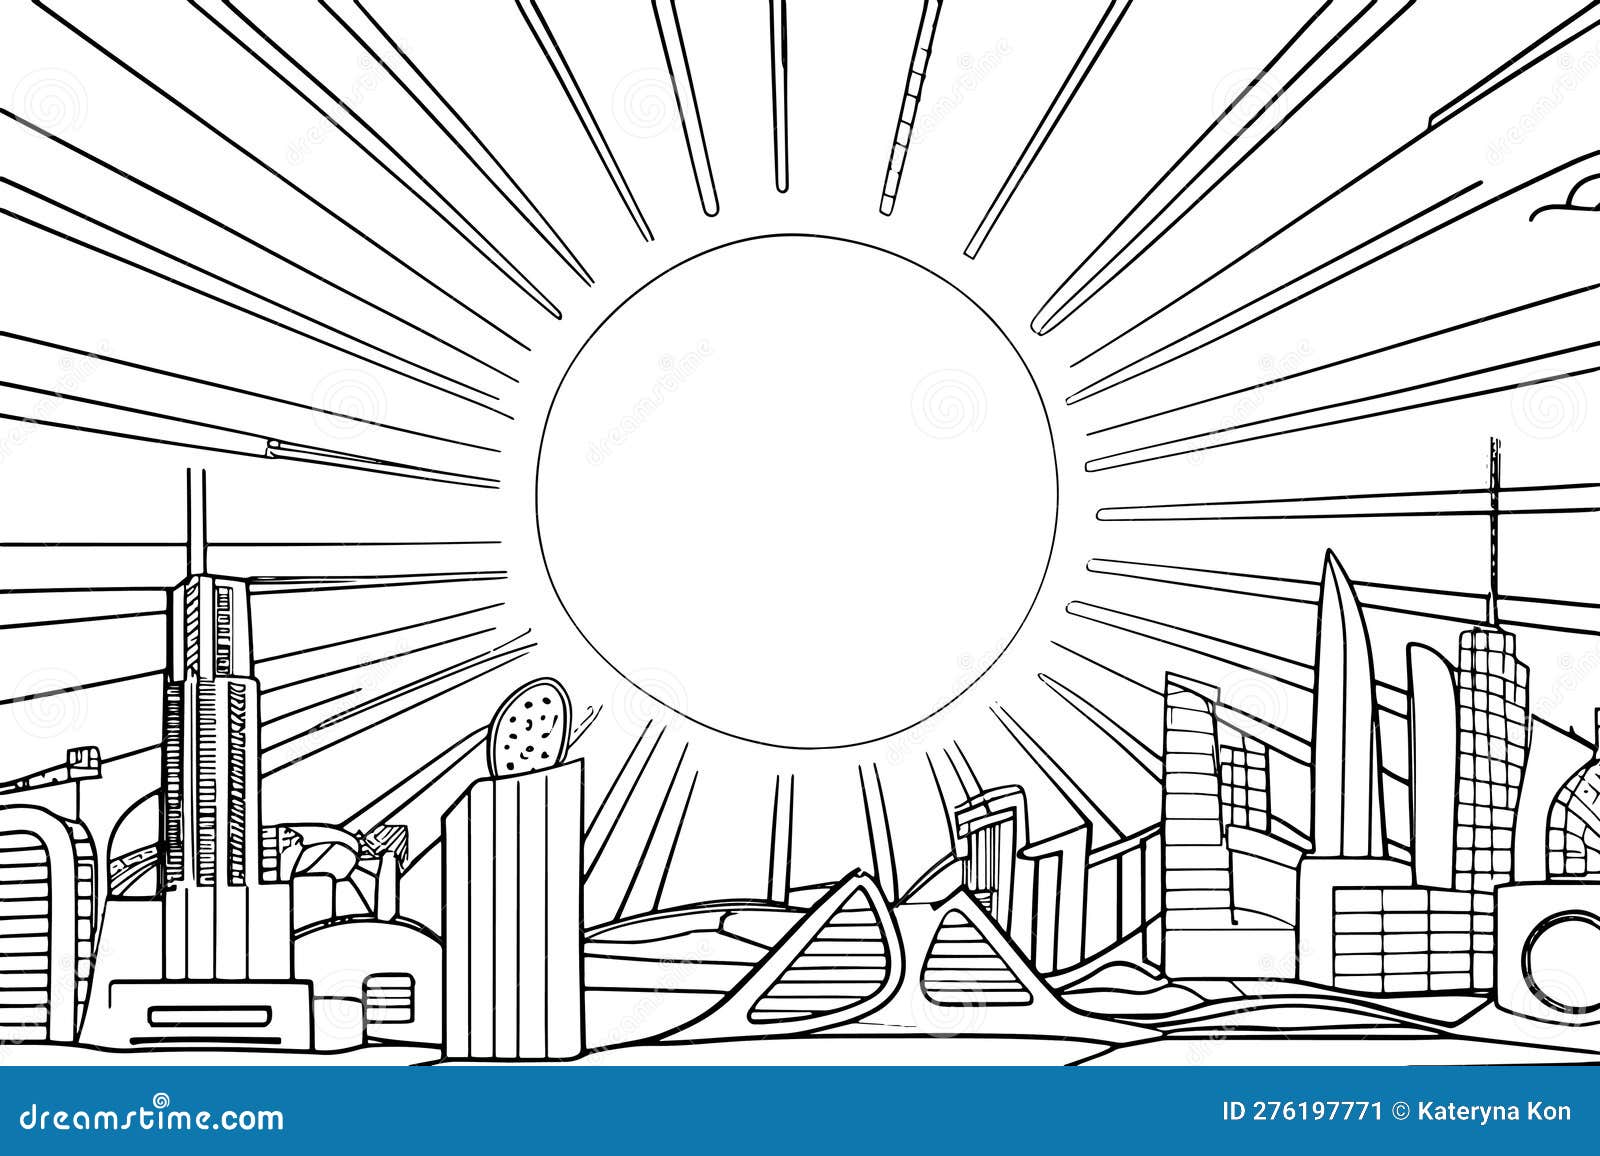 A modern futuristic city coloring page illustration featuring a big sun shining over tall skyscrapers and advanced technology stock vector